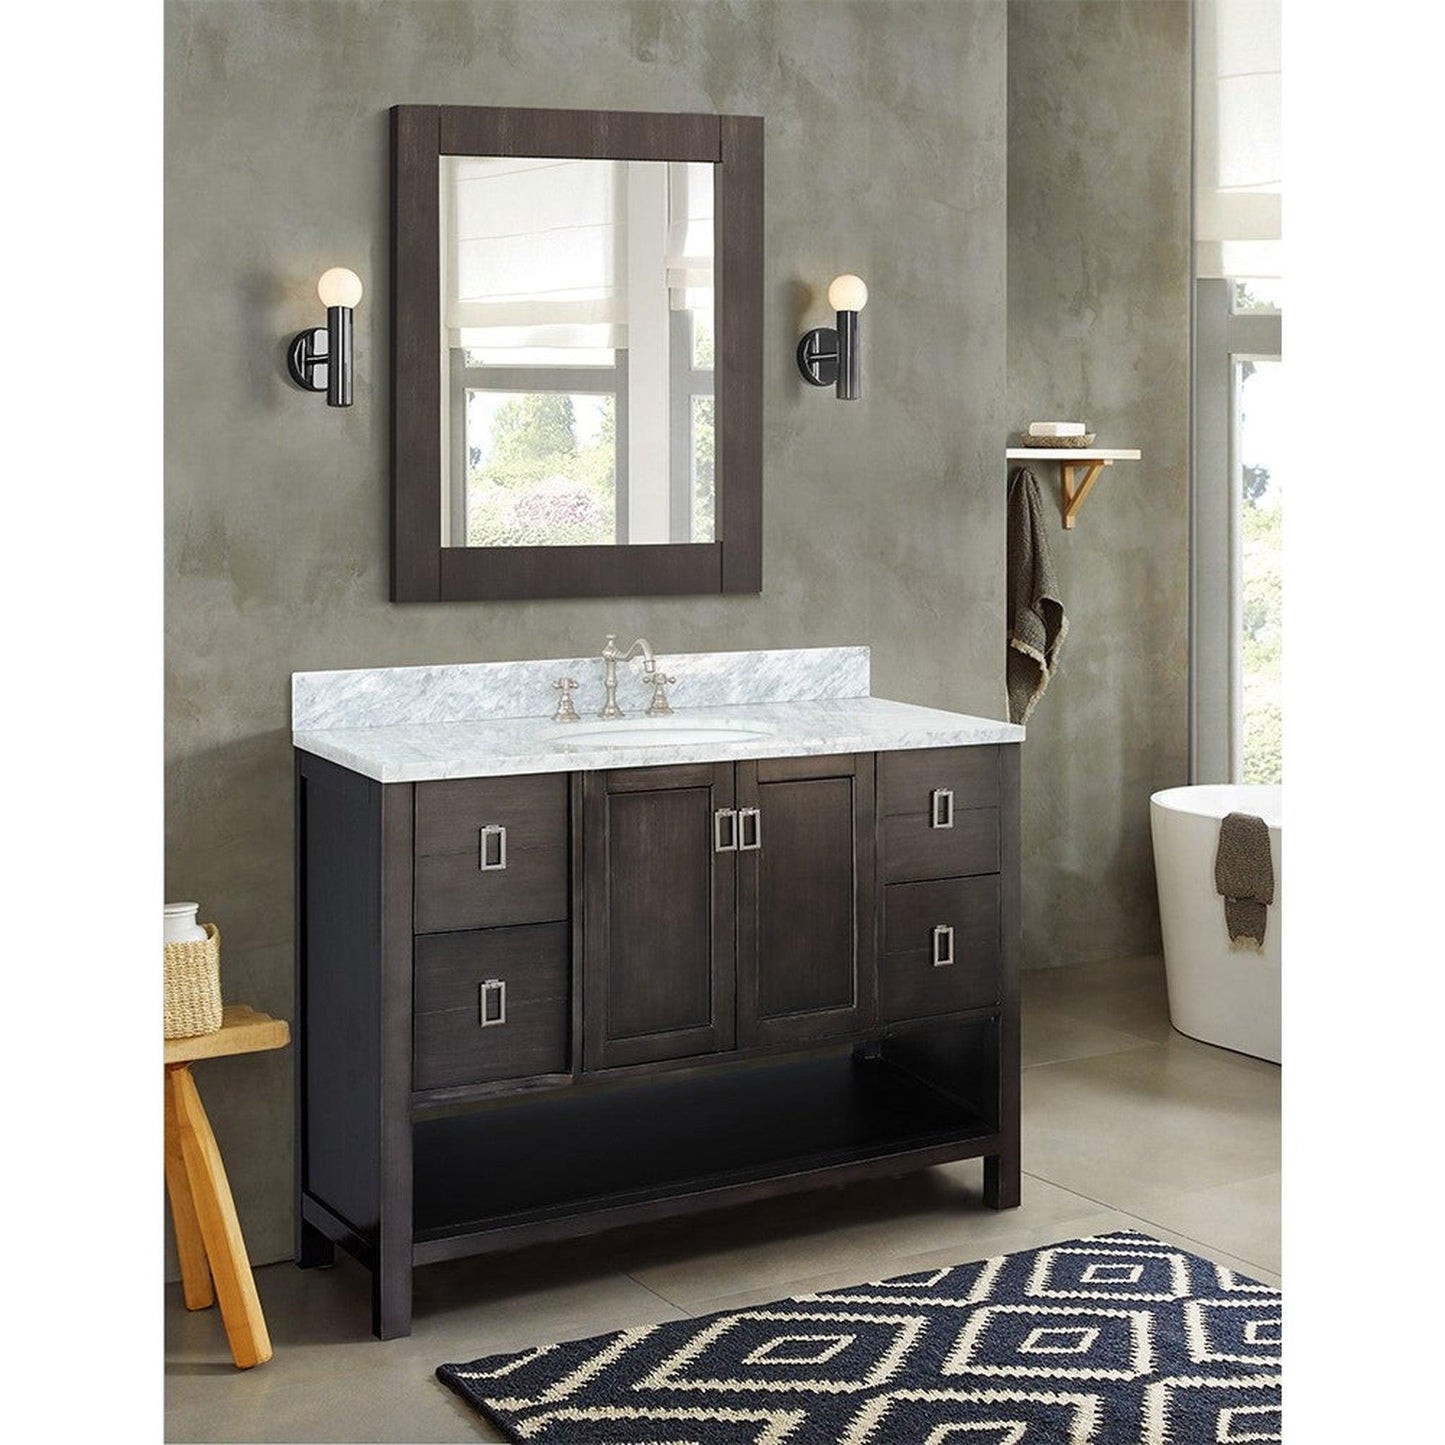 Bellaterra Home Monterey 49" 2-Door 4-Drawer Silvery Brown Freestanding Vanity Set With Ceramic Undermount Oval Sink and White Carrara Marble Top